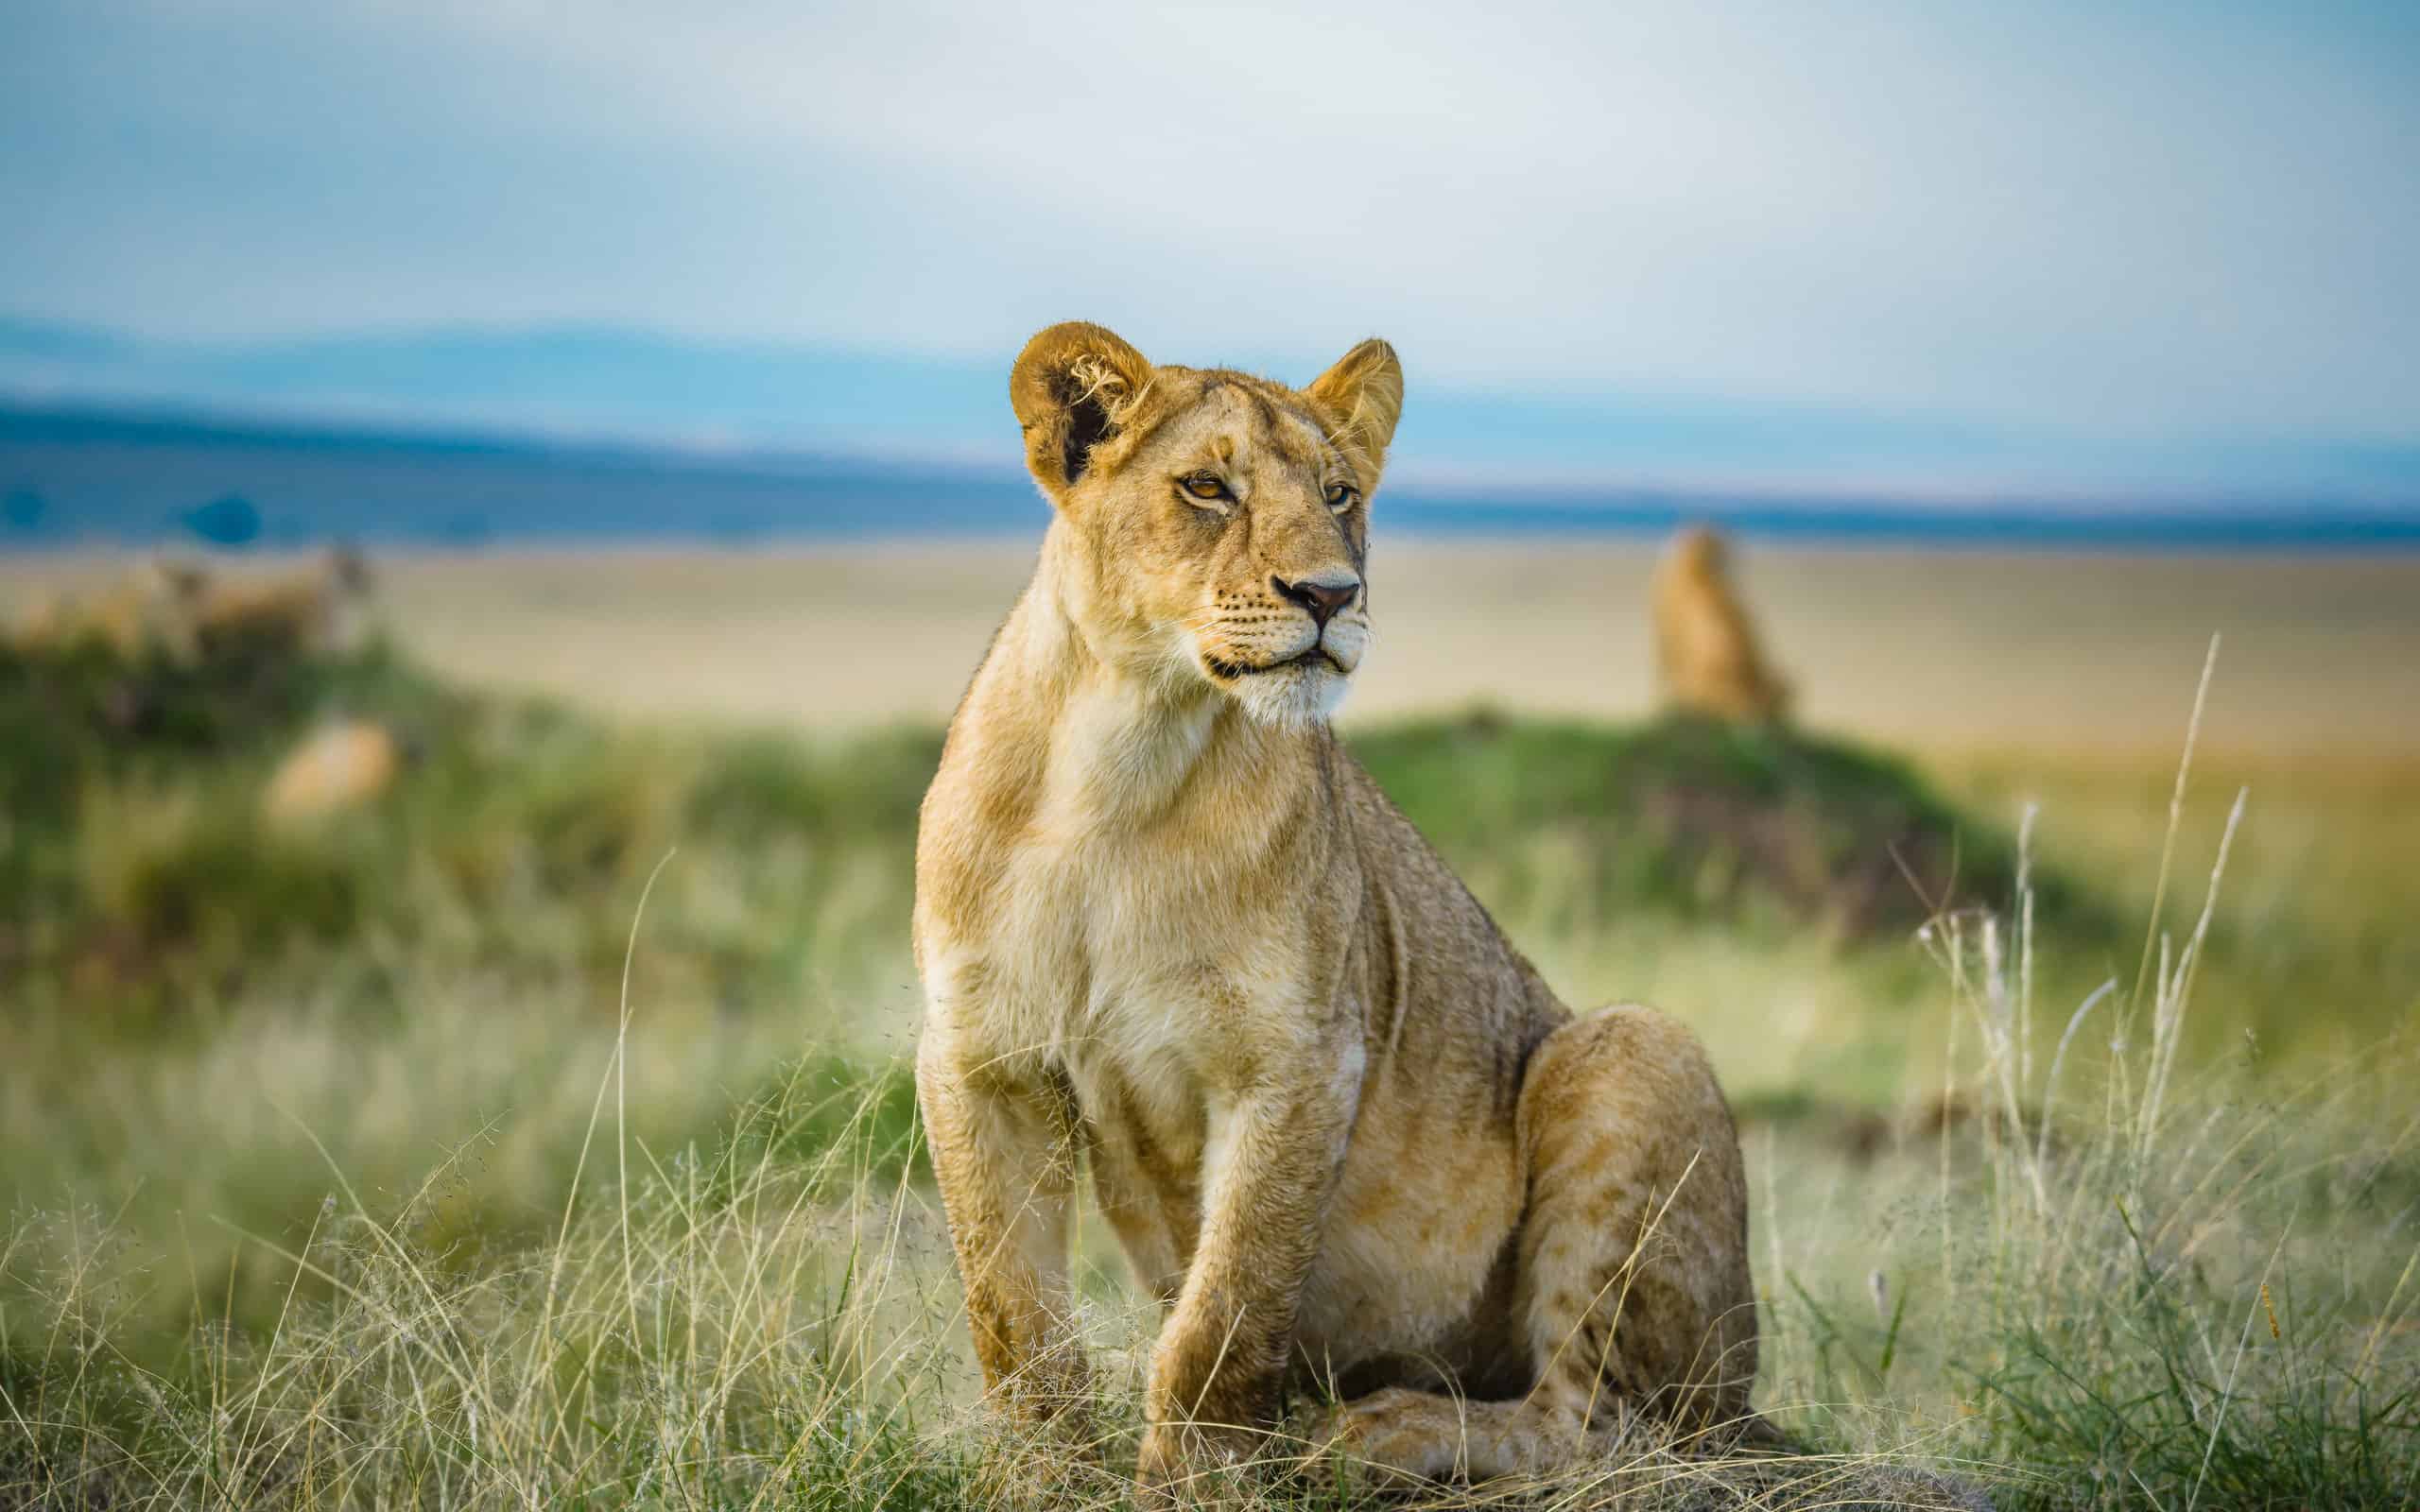 Sitting lioness face forward and looking off to the side